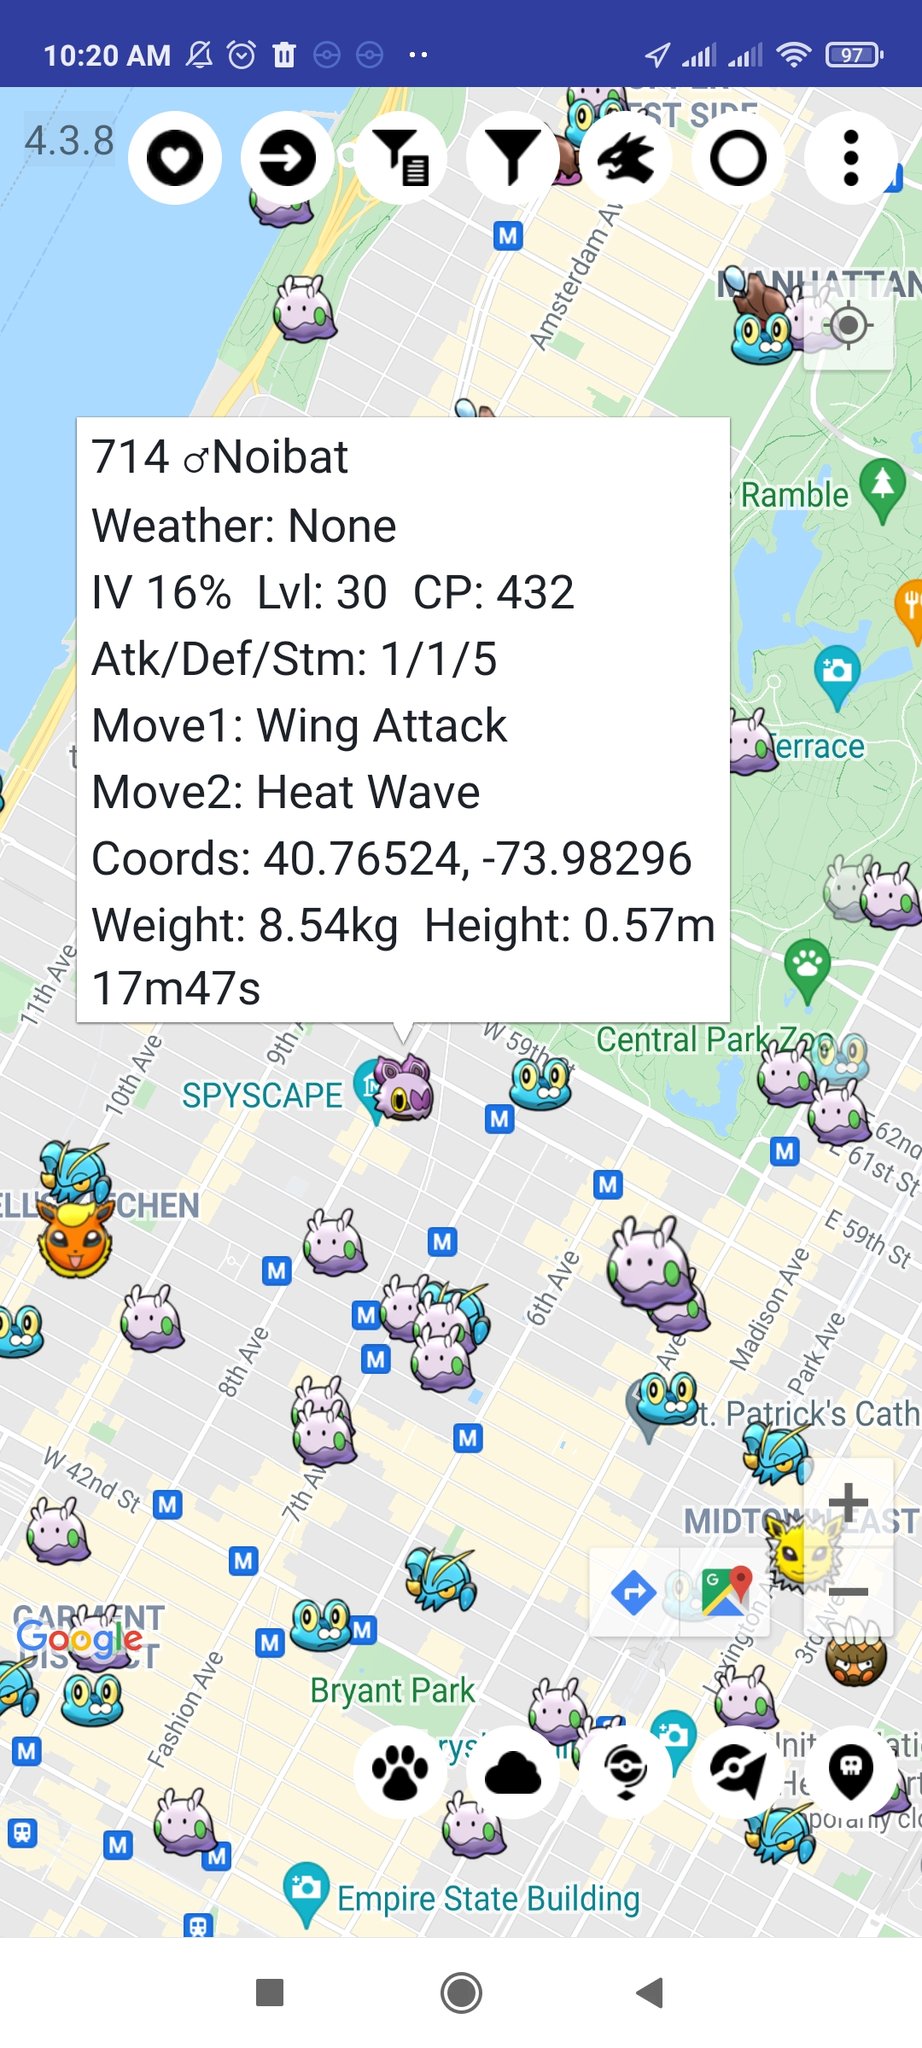 💯✨🕵👀 ENGEL GO 🚨📱 💯✨ on X: 📌🥳🎉✨Campeonato Pokémon Tailandia 🇹🇭  Coordenadas: 13.7474,100.5393 ➡️✨ If You are lucky you can get a Shiny Unown  T ✨ Credits to @PokemonGoAbs #PokemonGO  / X